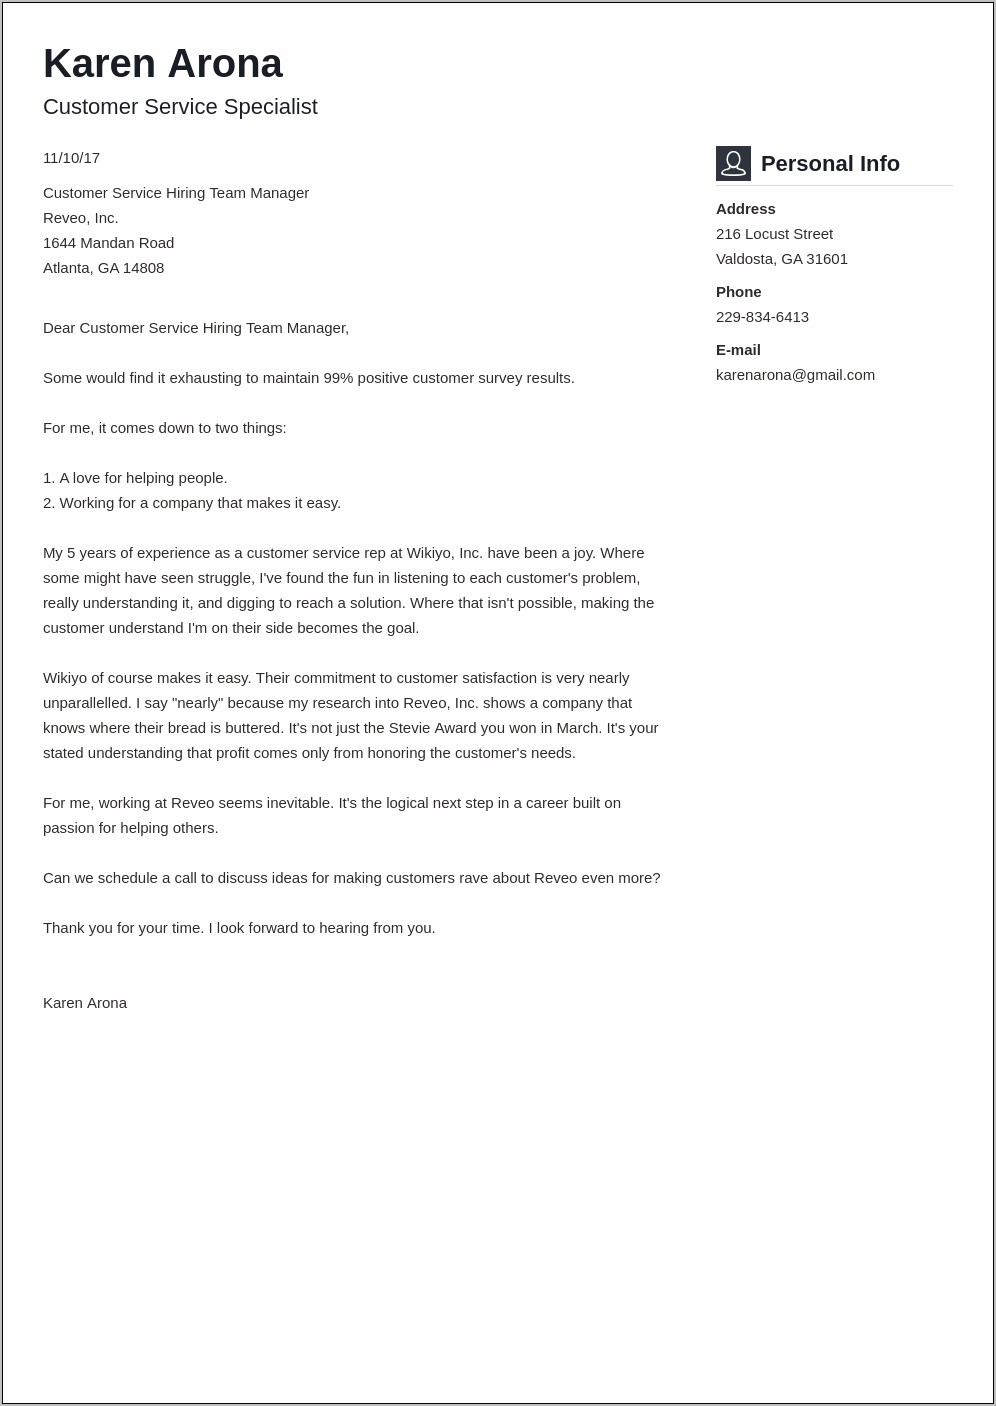 Email Recruiter With Resume And Cover Letter